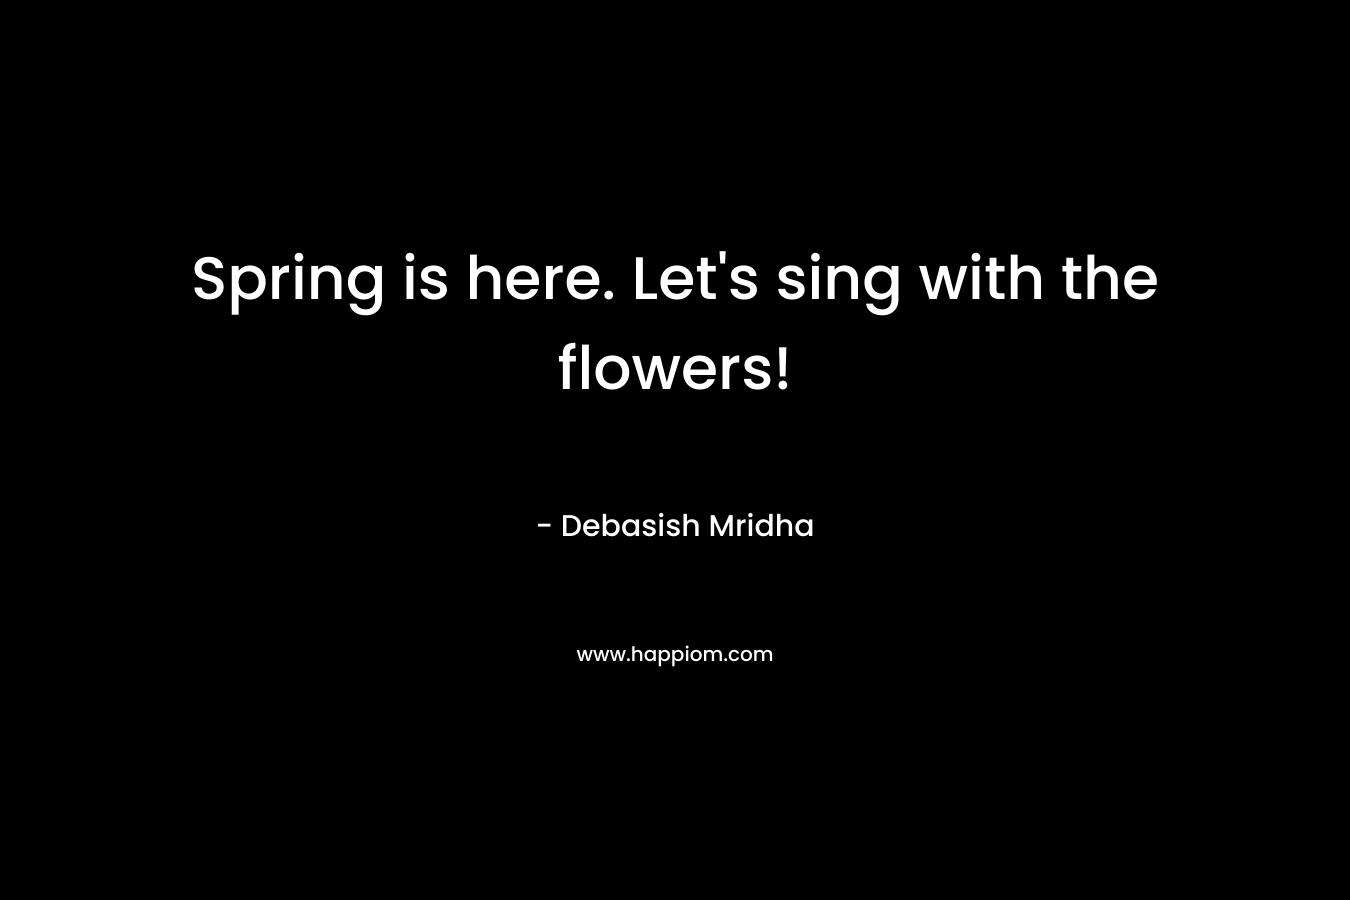 Spring is here. Let's sing with the flowers!